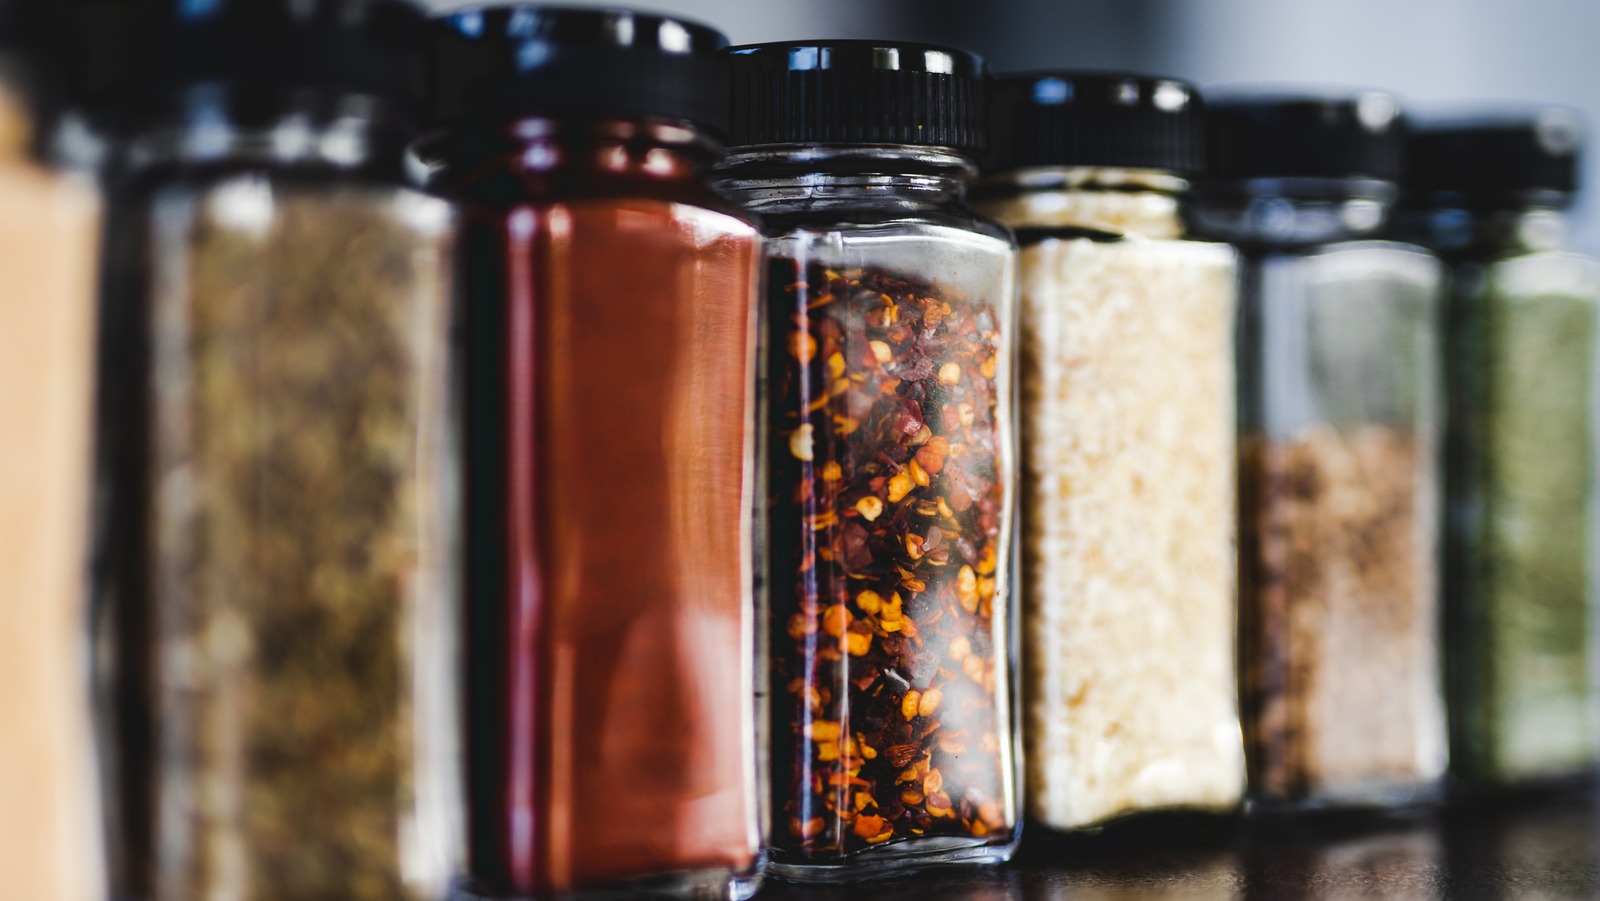 https://www.thedailymeal.com/img/gallery/why-you-need-to-start-cleaning-your-spice-containers-more-often/l-intro-1675060260.jpg